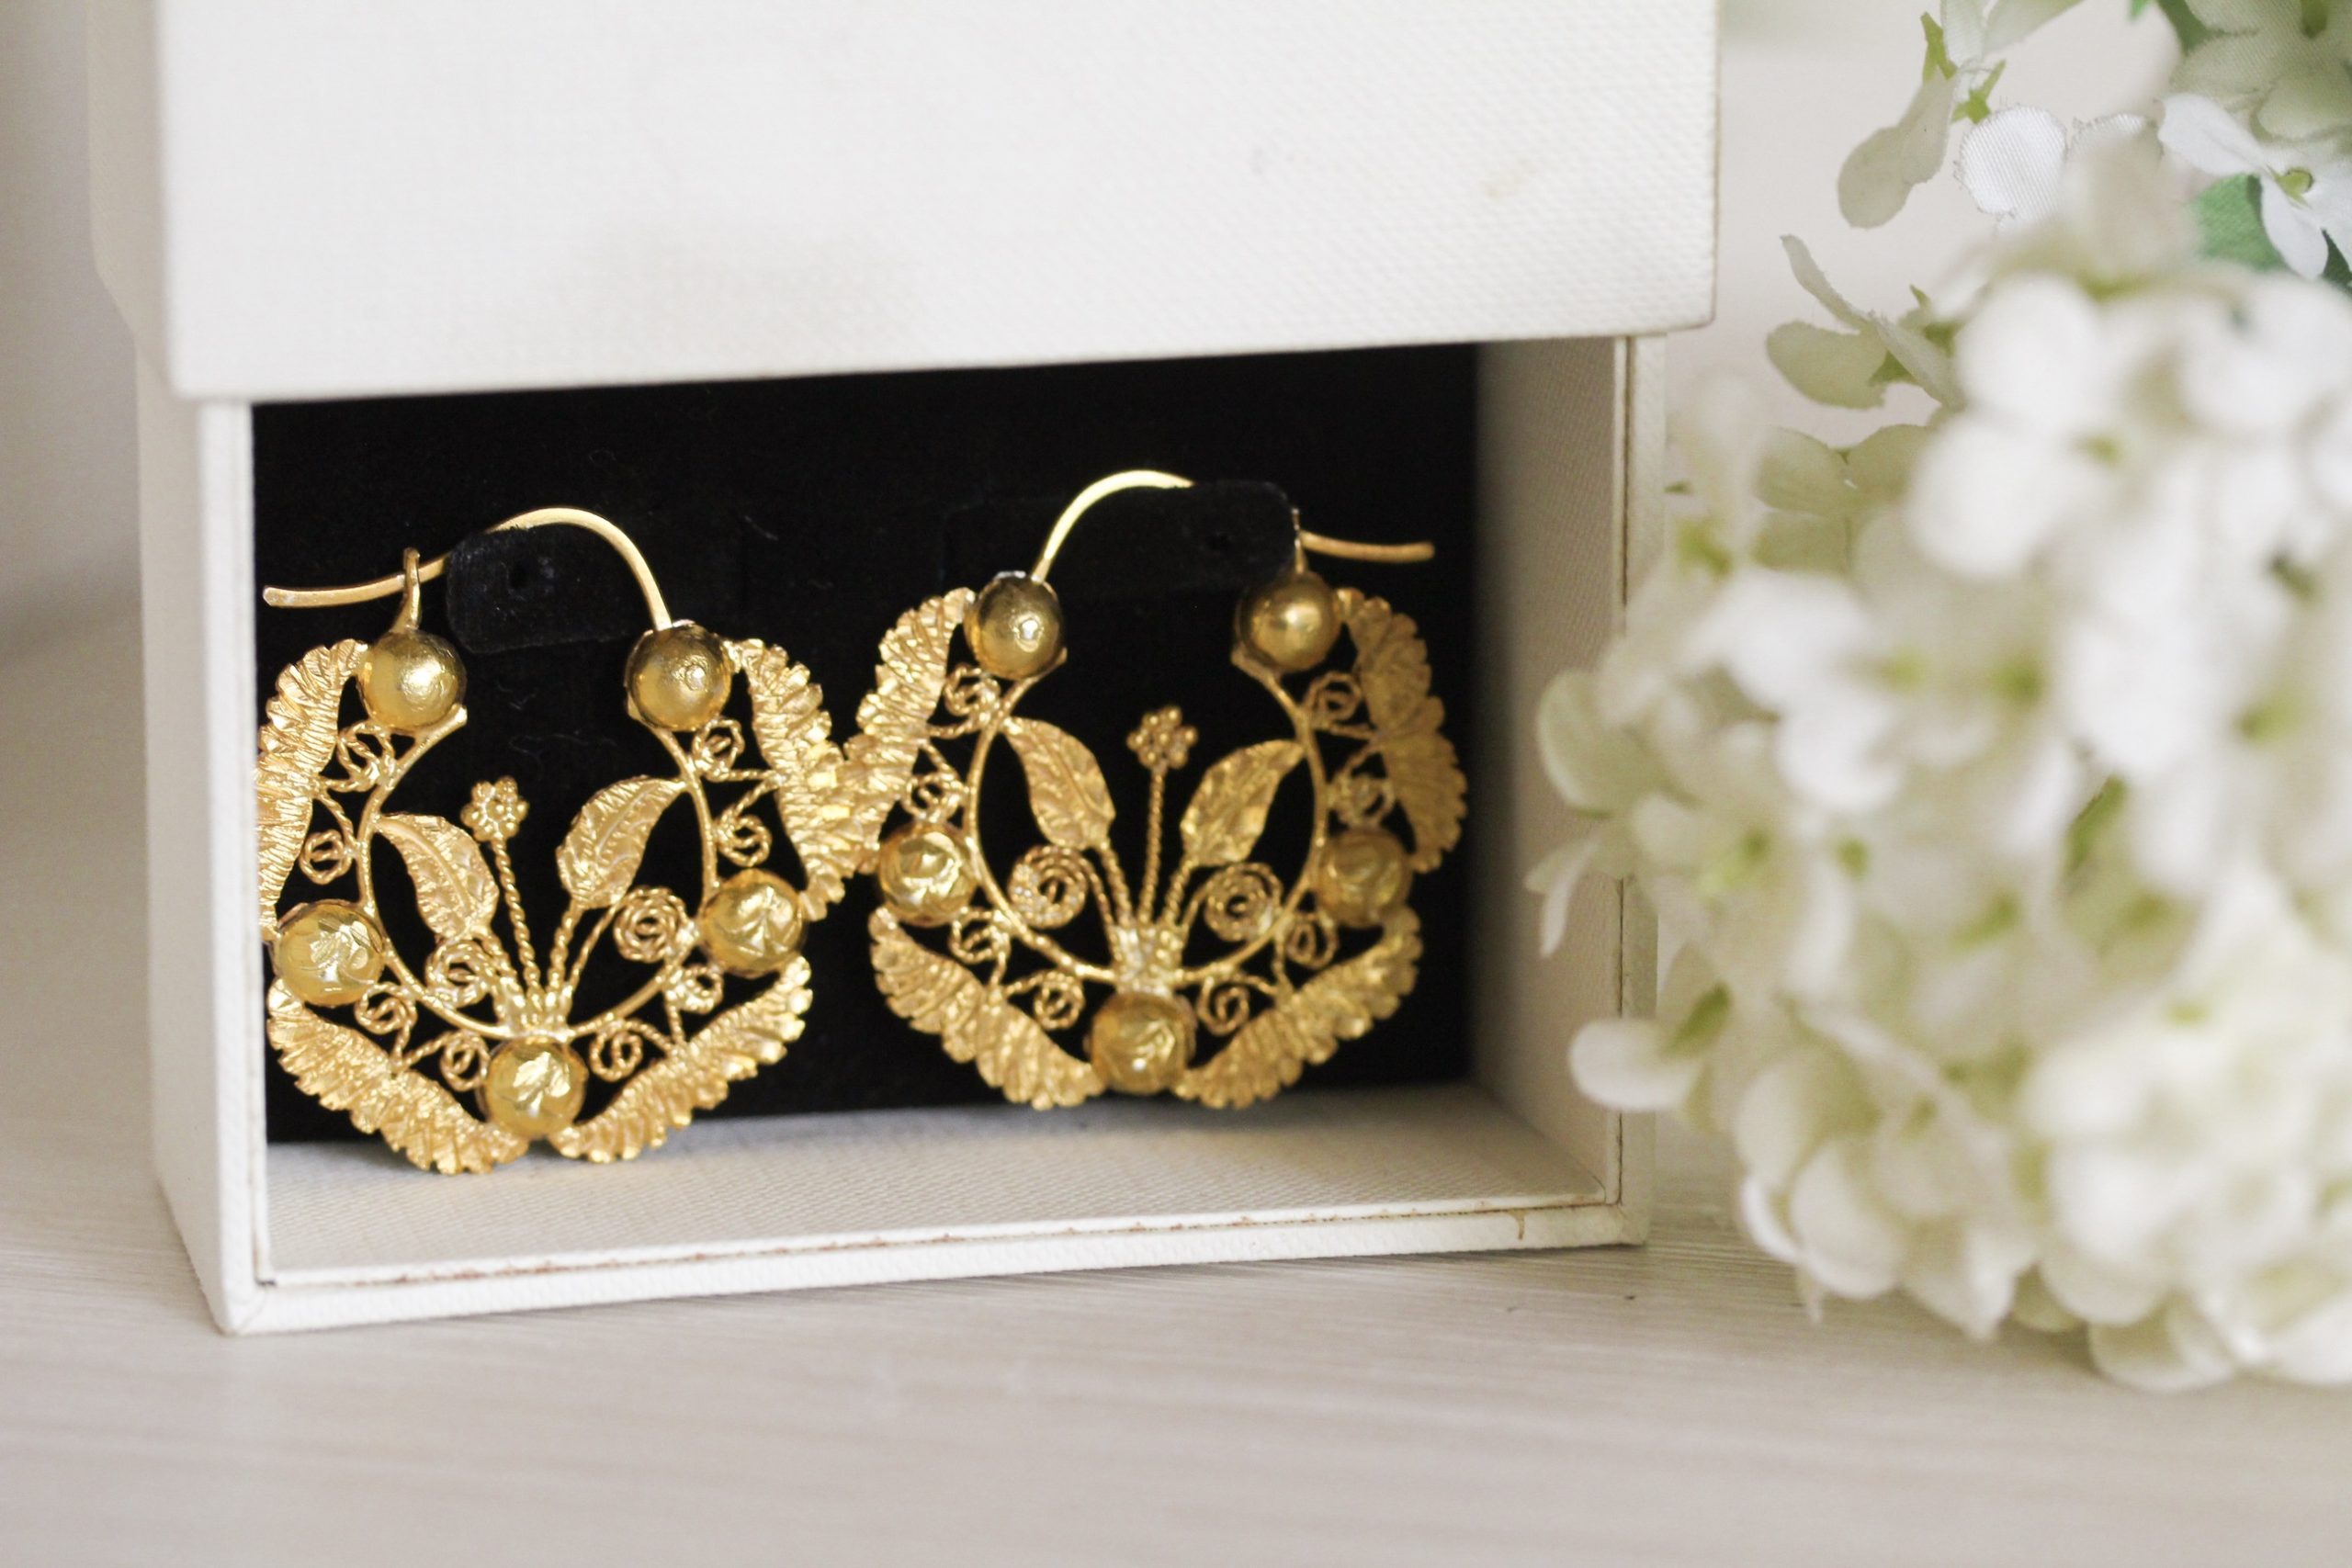 Intricately crafted Felicia Creolla earrings made for the modern Filipina. Wear your heritage loud and proud!